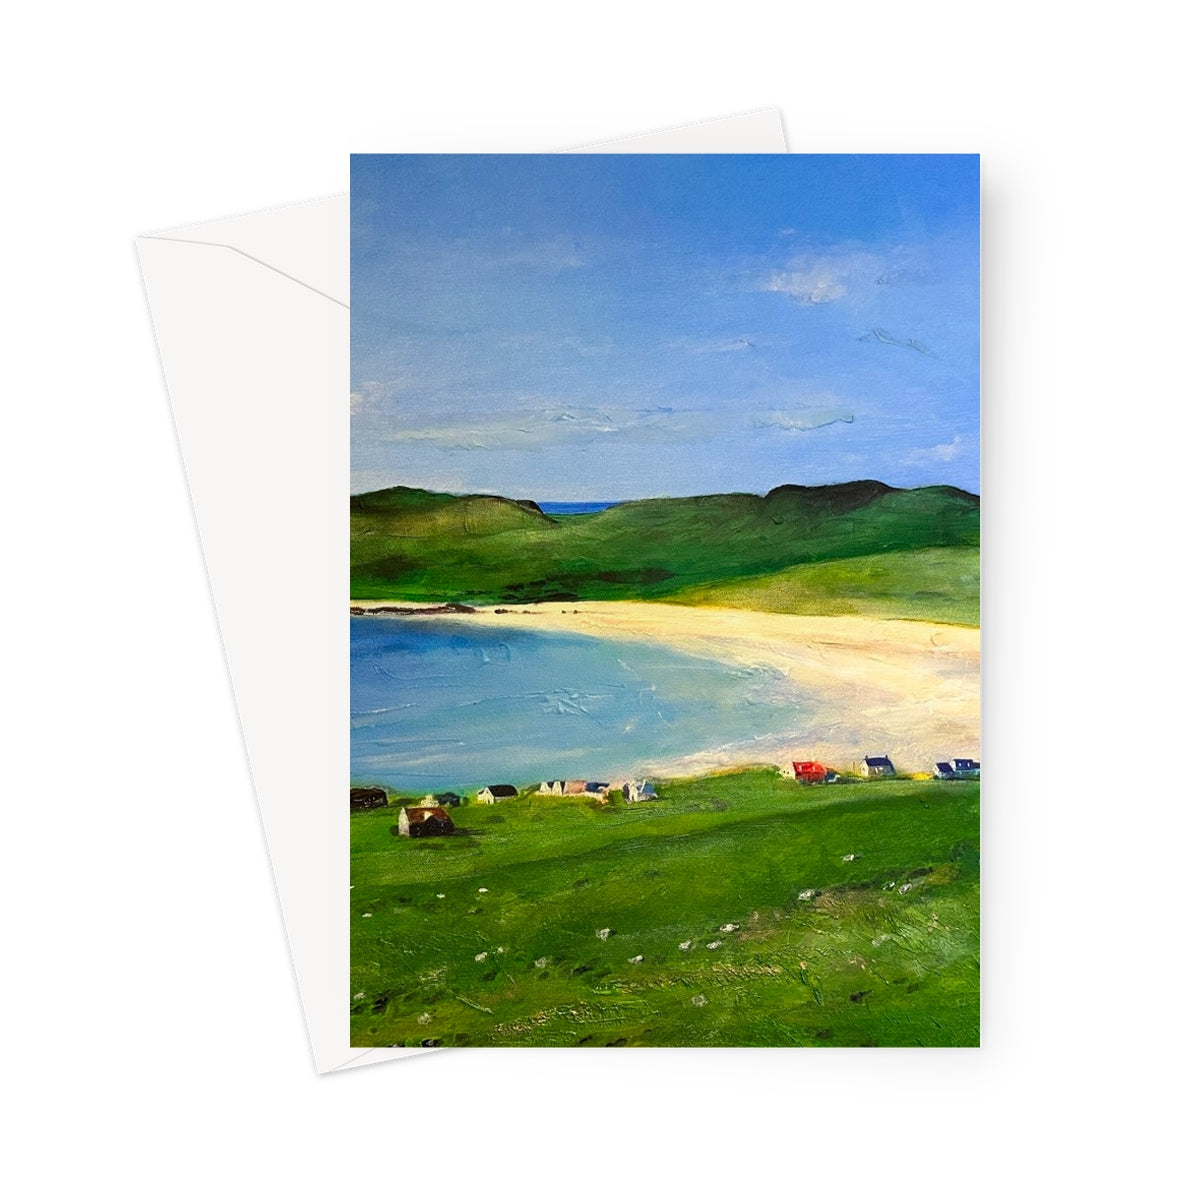 Balephuil Beach Tiree Art Gifts Greeting Card-Greetings Cards-Hebridean Islands Art Gallery-5"x7"-10 Cards-Paintings, Prints, Homeware, Art Gifts From Scotland By Scottish Artist Kevin Hunter